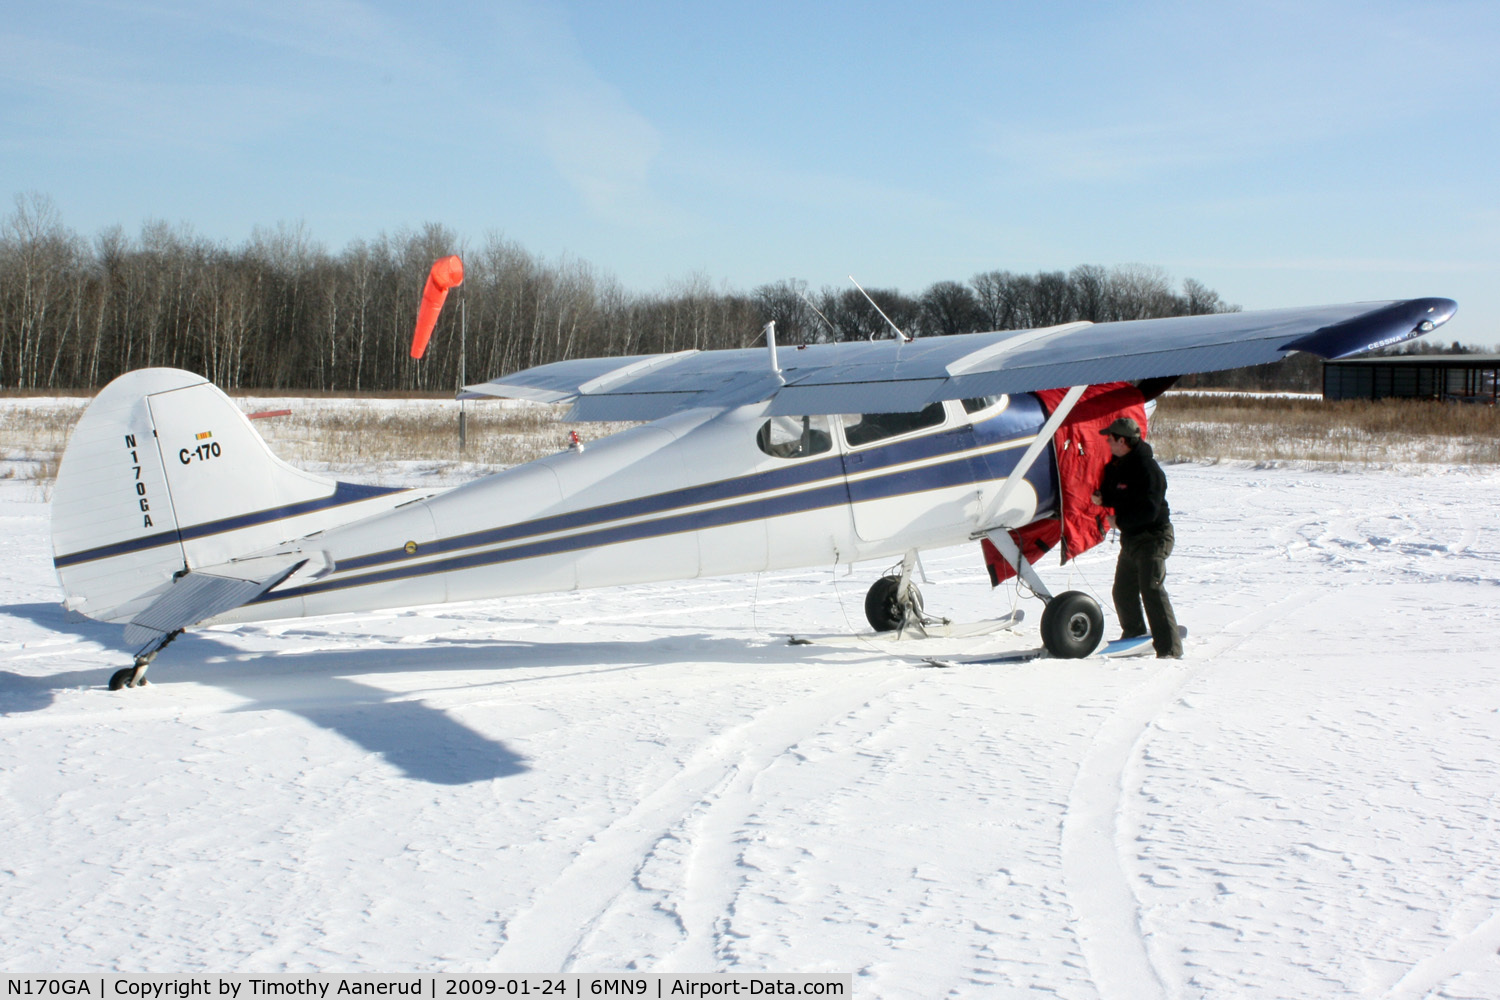 N170GA, 1951 Cessna 170A C/N 19948, Arriving at Benson's Airport on skis. 1951 Cessna 170A c/n 19948 